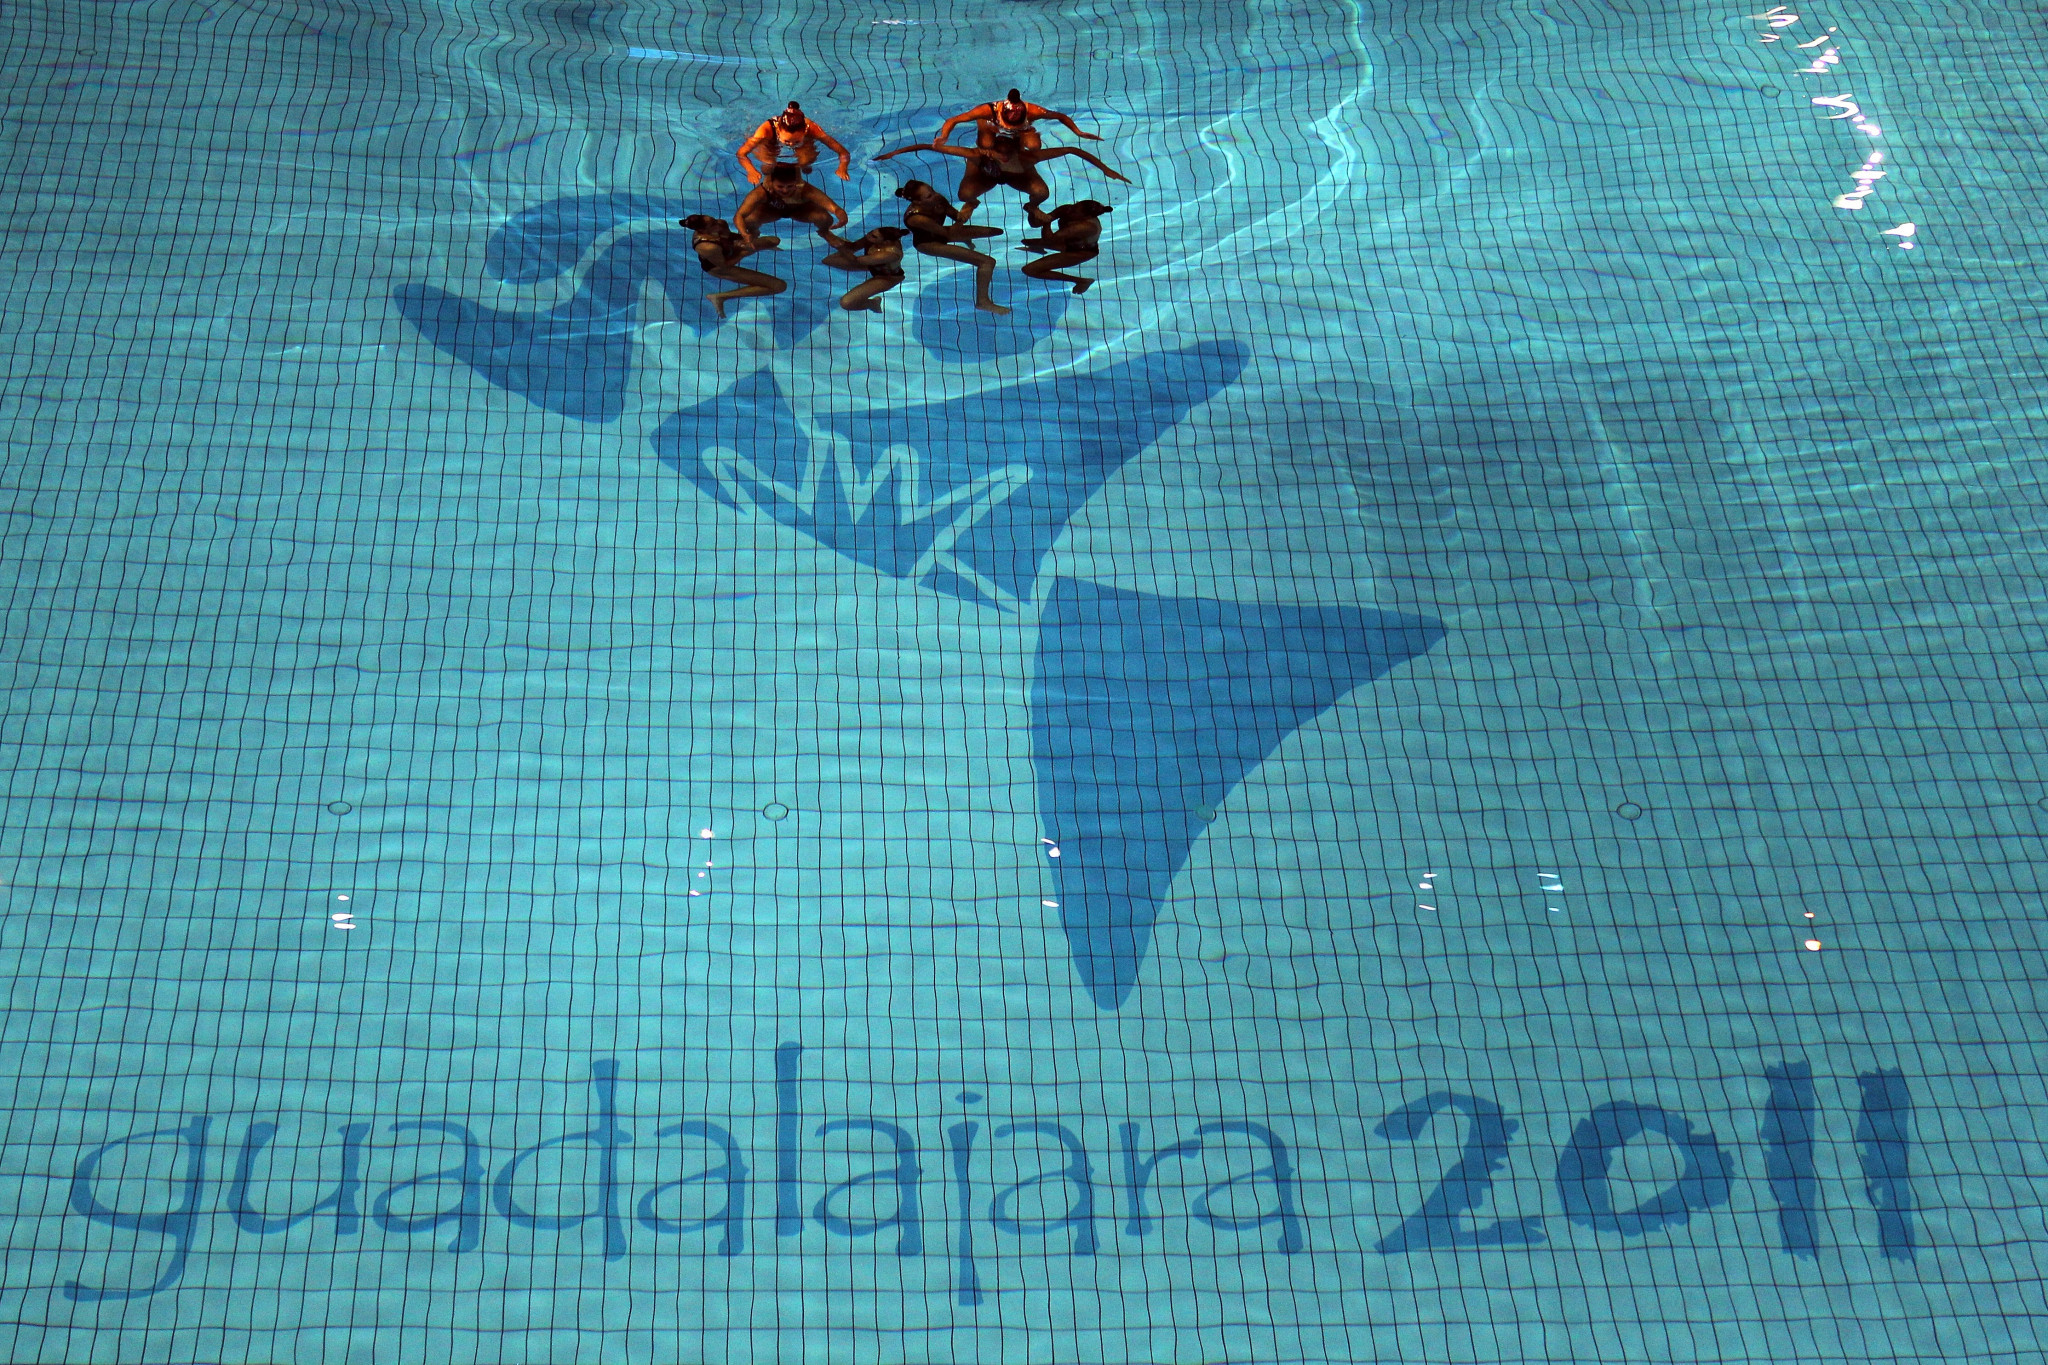 Guadalajara is preparing to host its biggest sporting event since staging the 2011 Pan American Games ©Getty Images